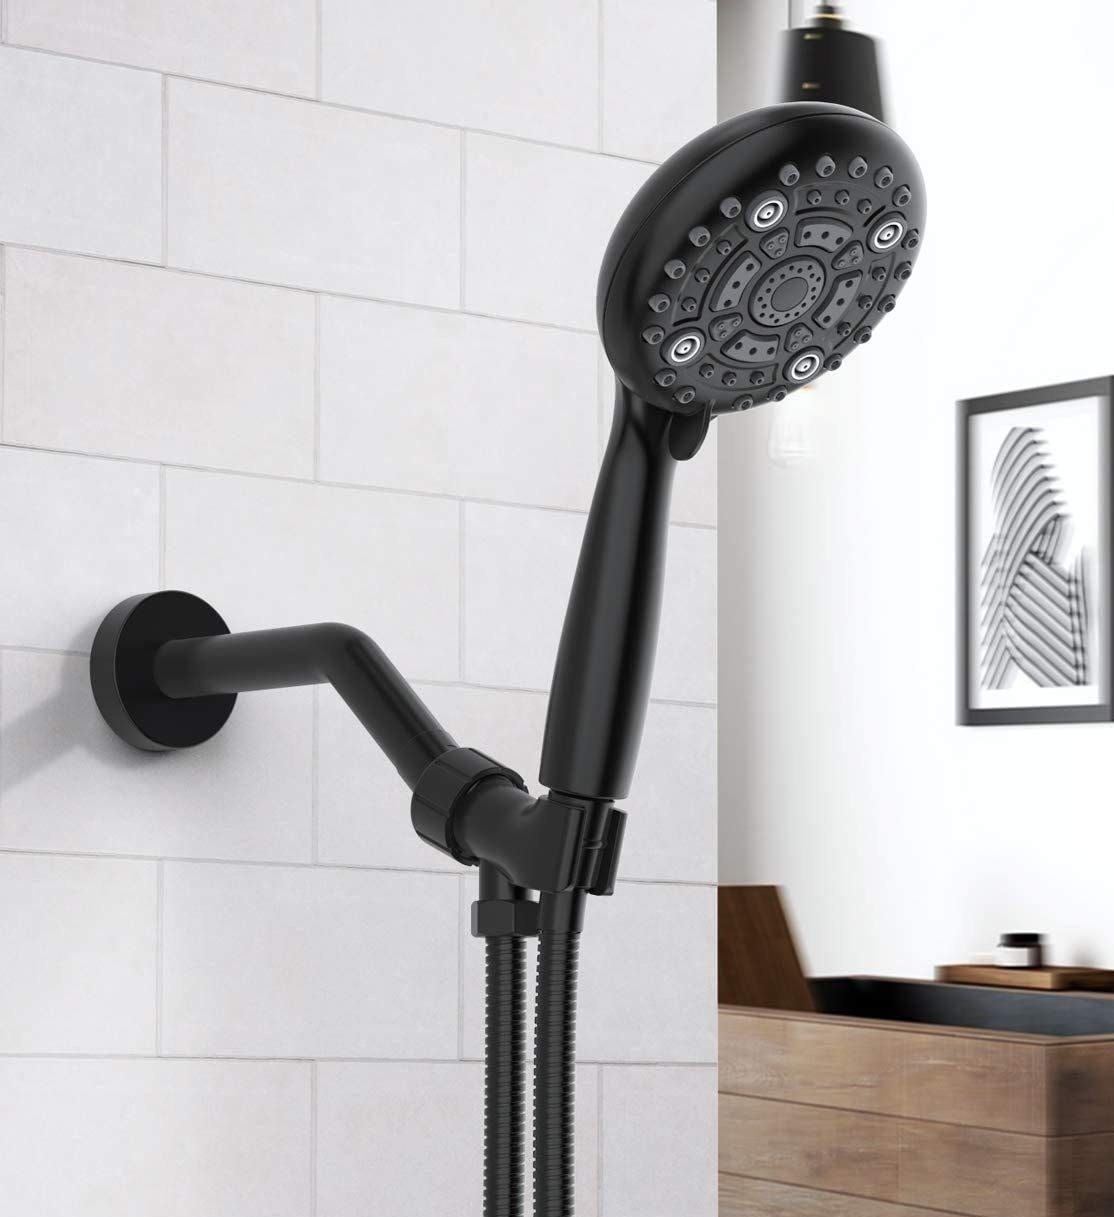 the shower head on a tiled wall